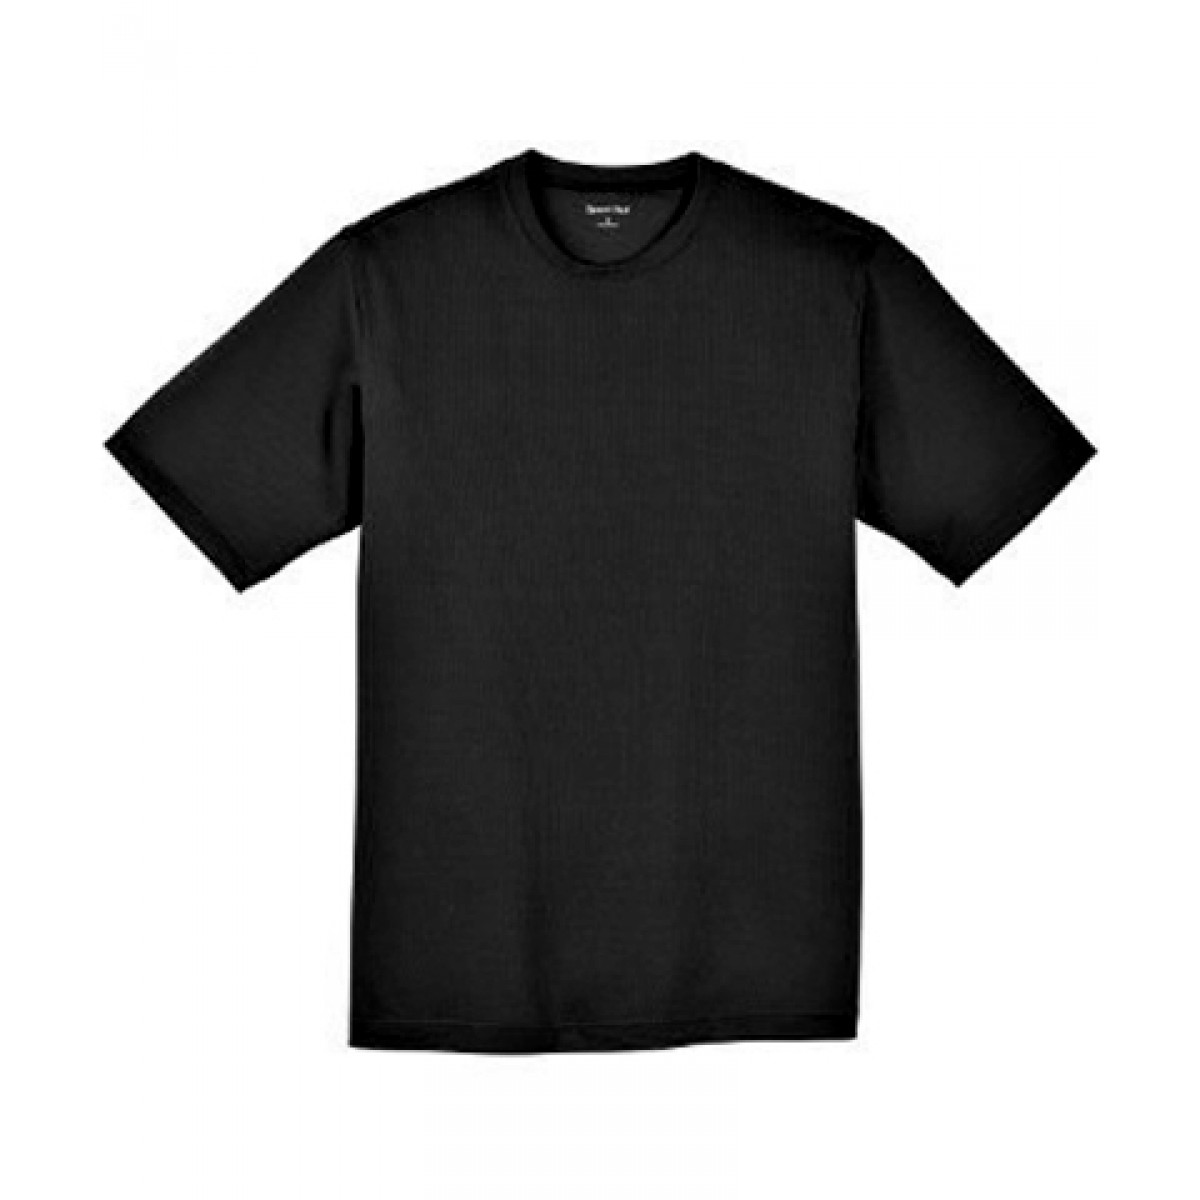 SS Dri-Fit Tees - Web Store Special!-Black-S